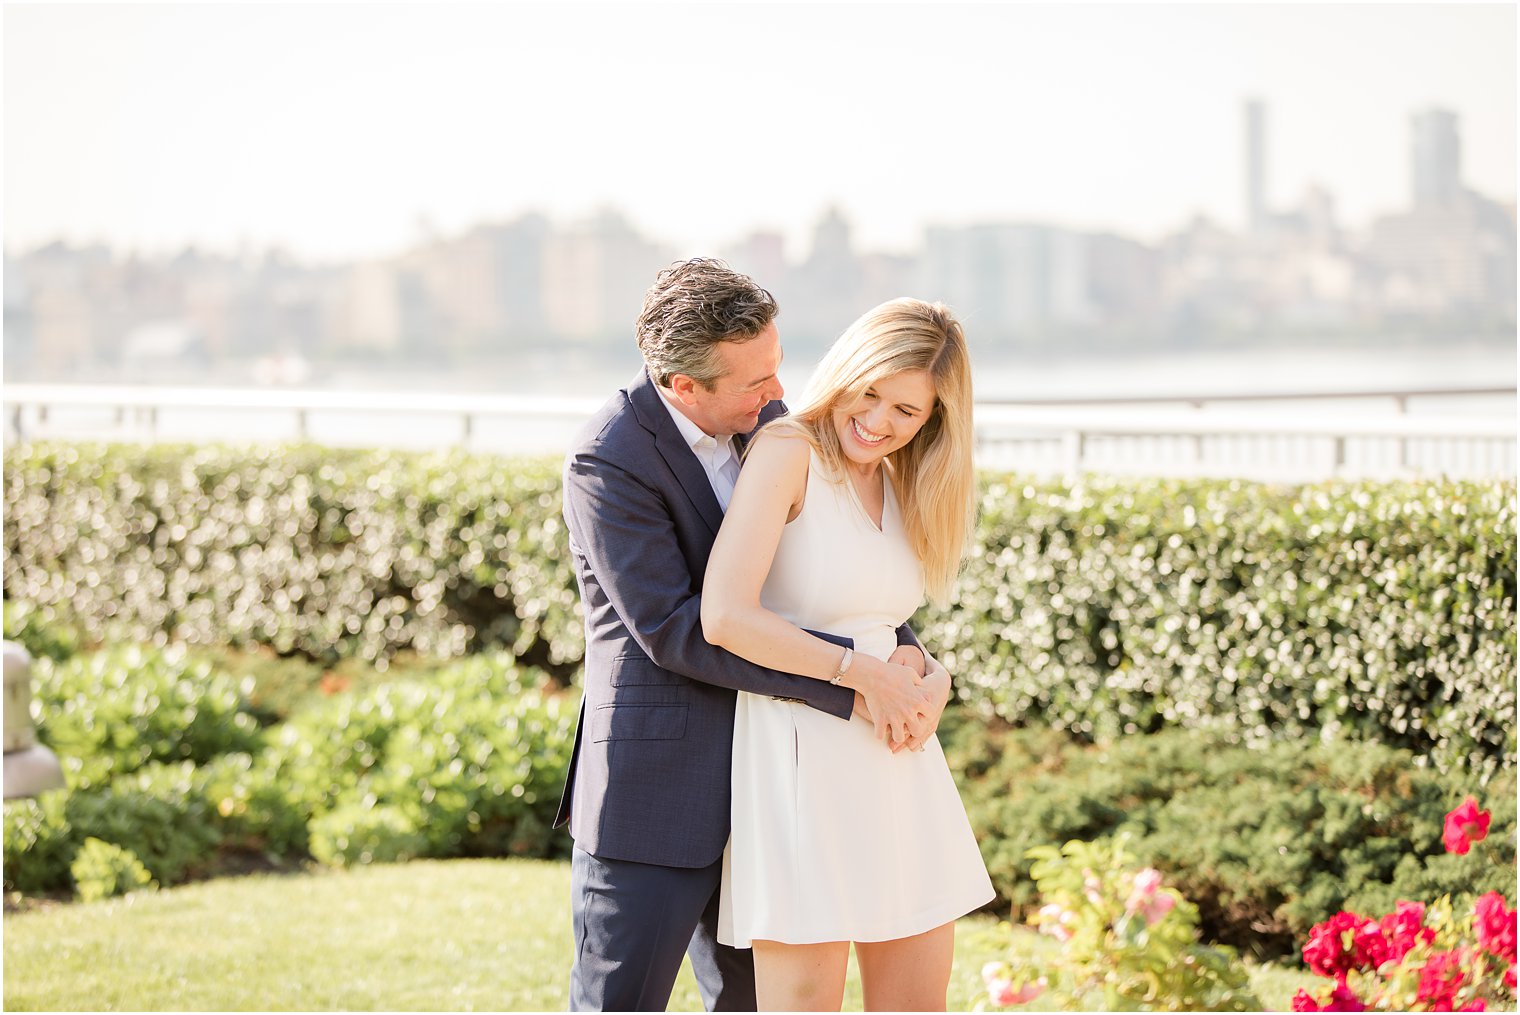 Groom tickling bride during Hoboken Rooftop Engagement by Idalia Photography